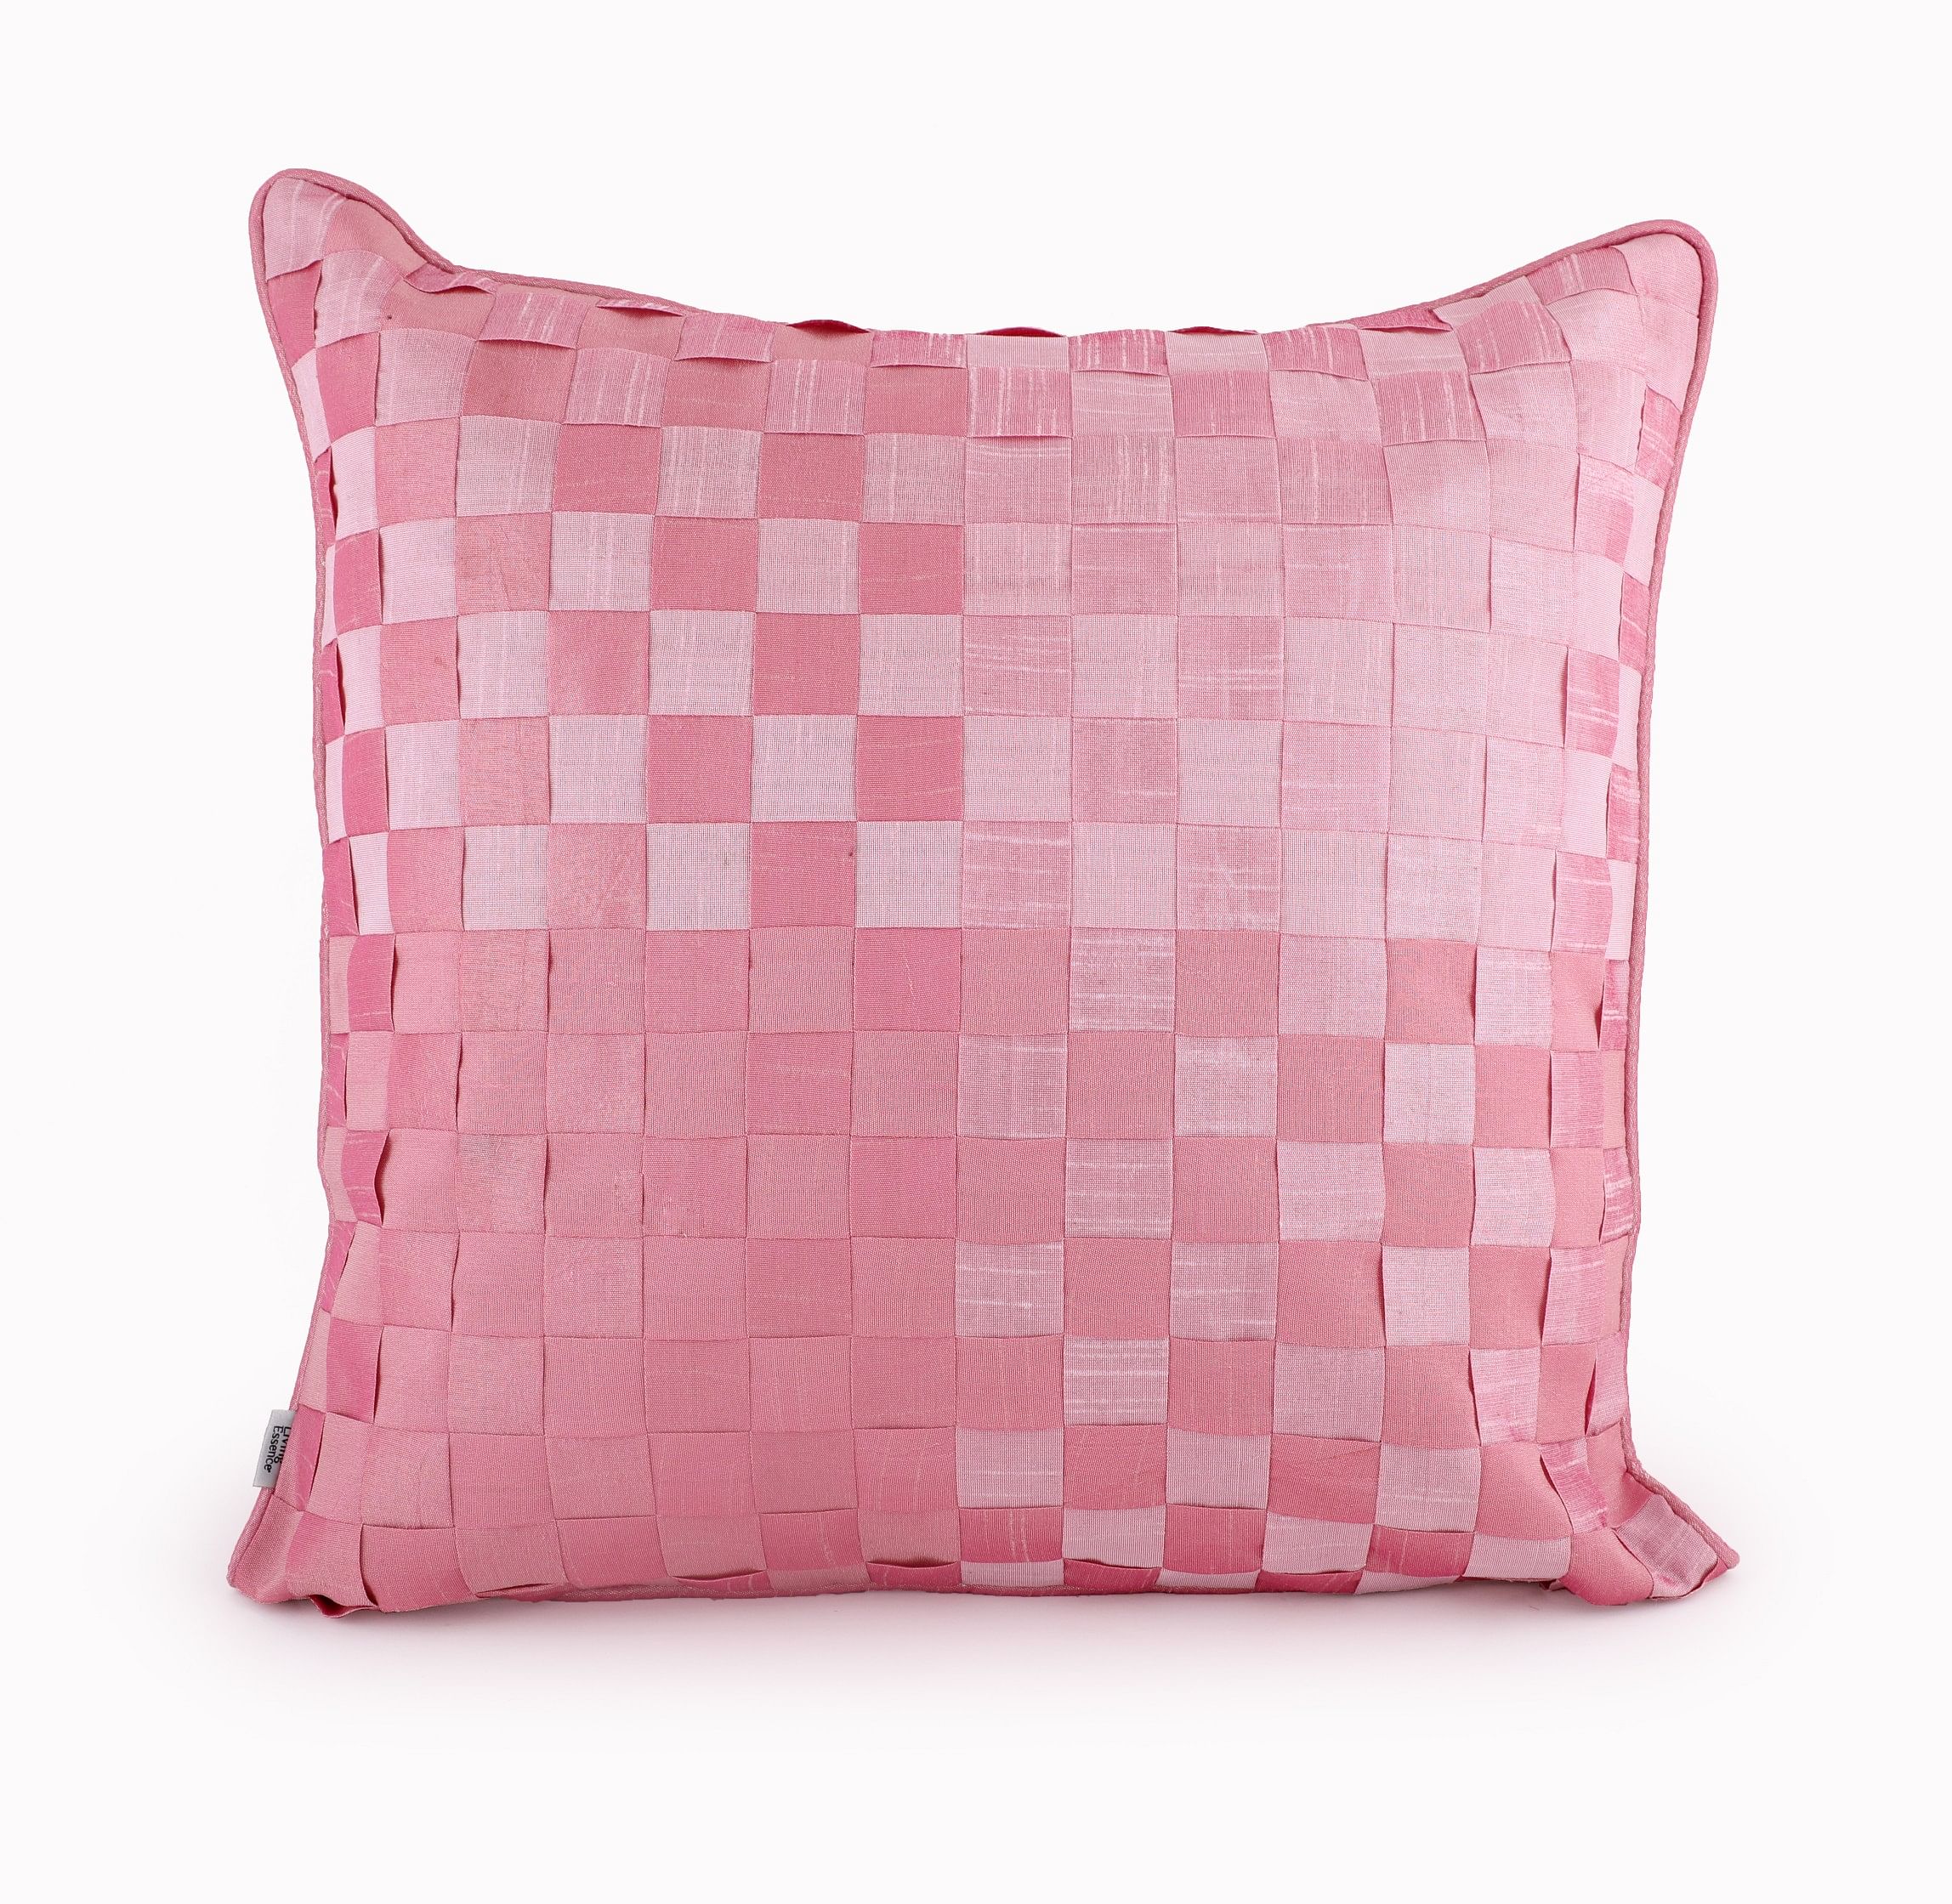 Palace Life  Cushion Cover 16X16 CM in Rose Colour by Living Essence